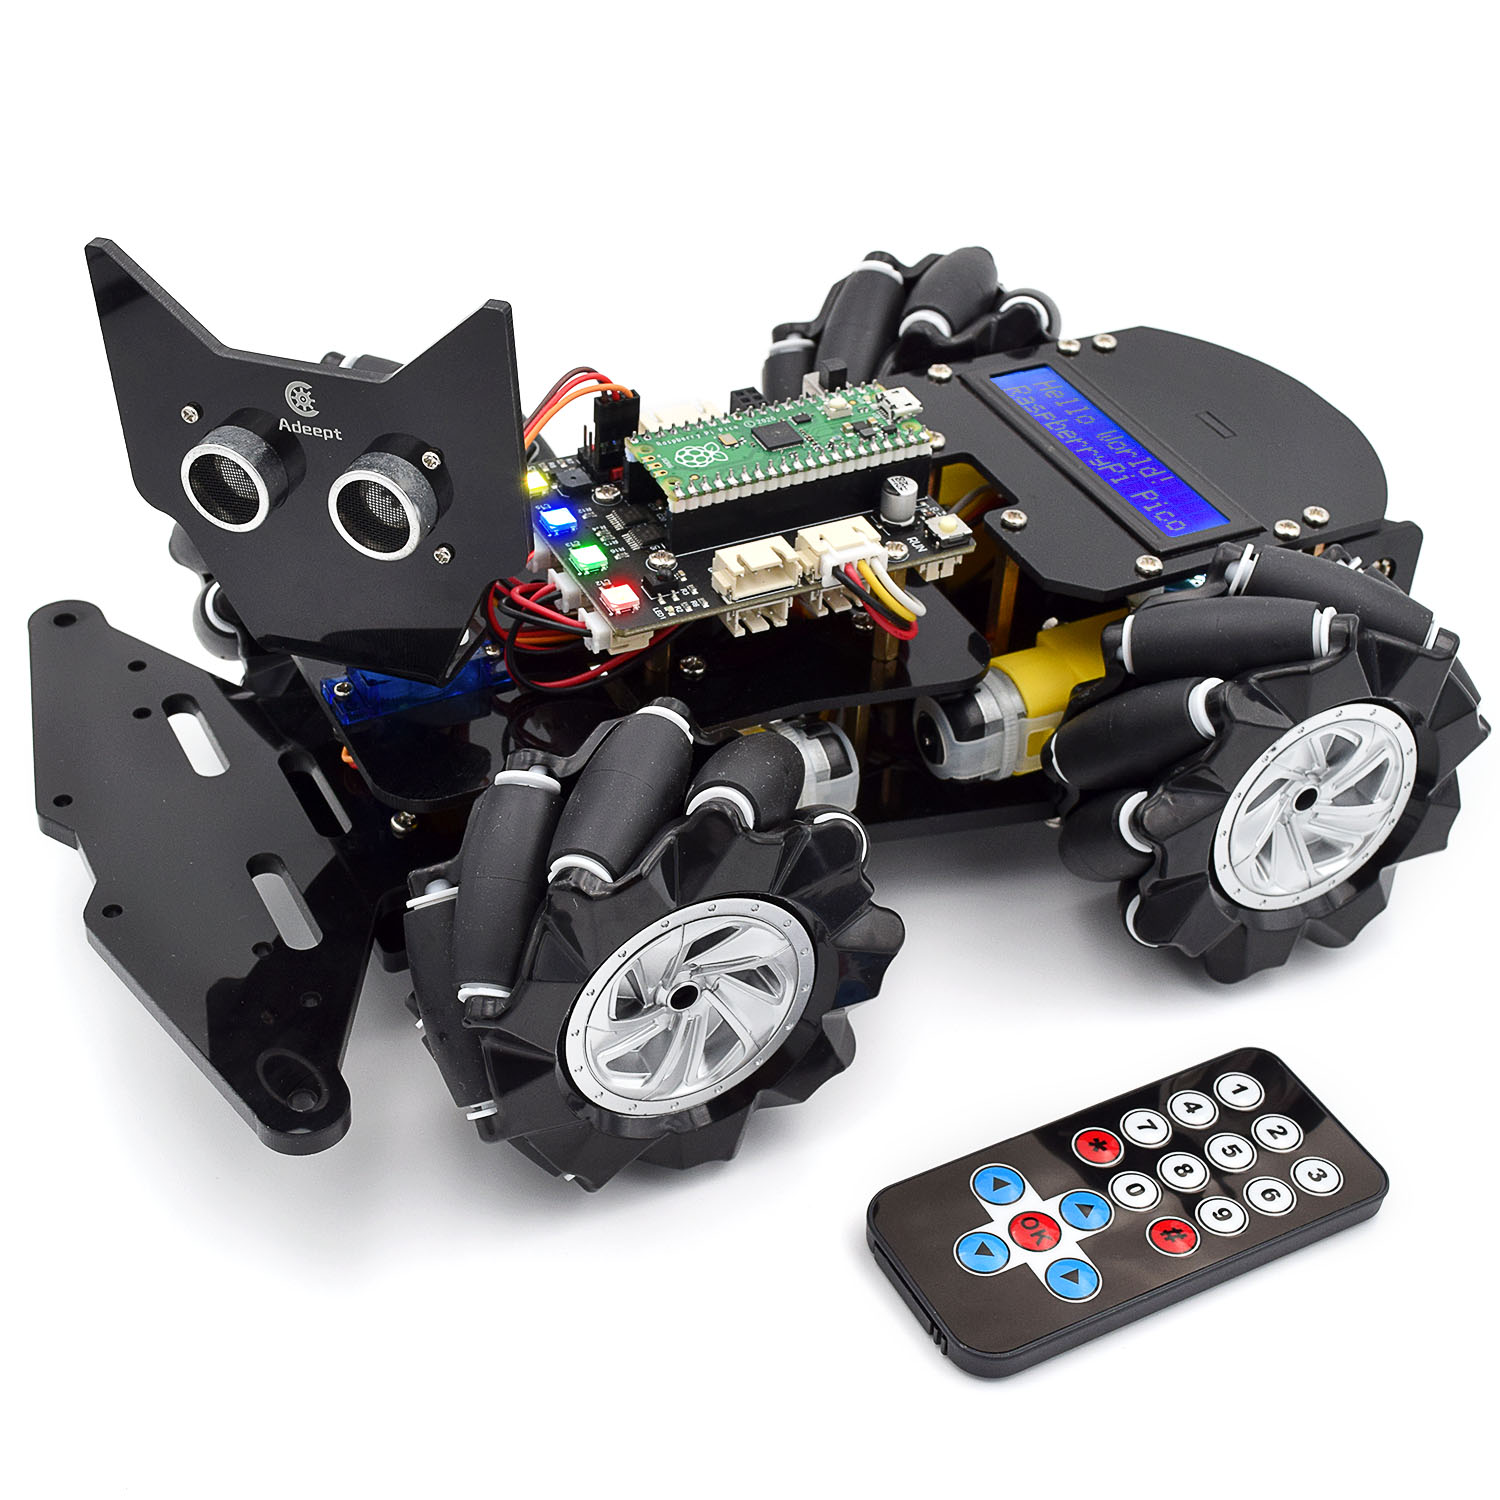 Adeept 4WD Omni-directional Mecanum Wheels Robotic Car Kit for Raspberry Pi Pico DIY STEM Remote Controlled Educational Robot Kit with LCD1602